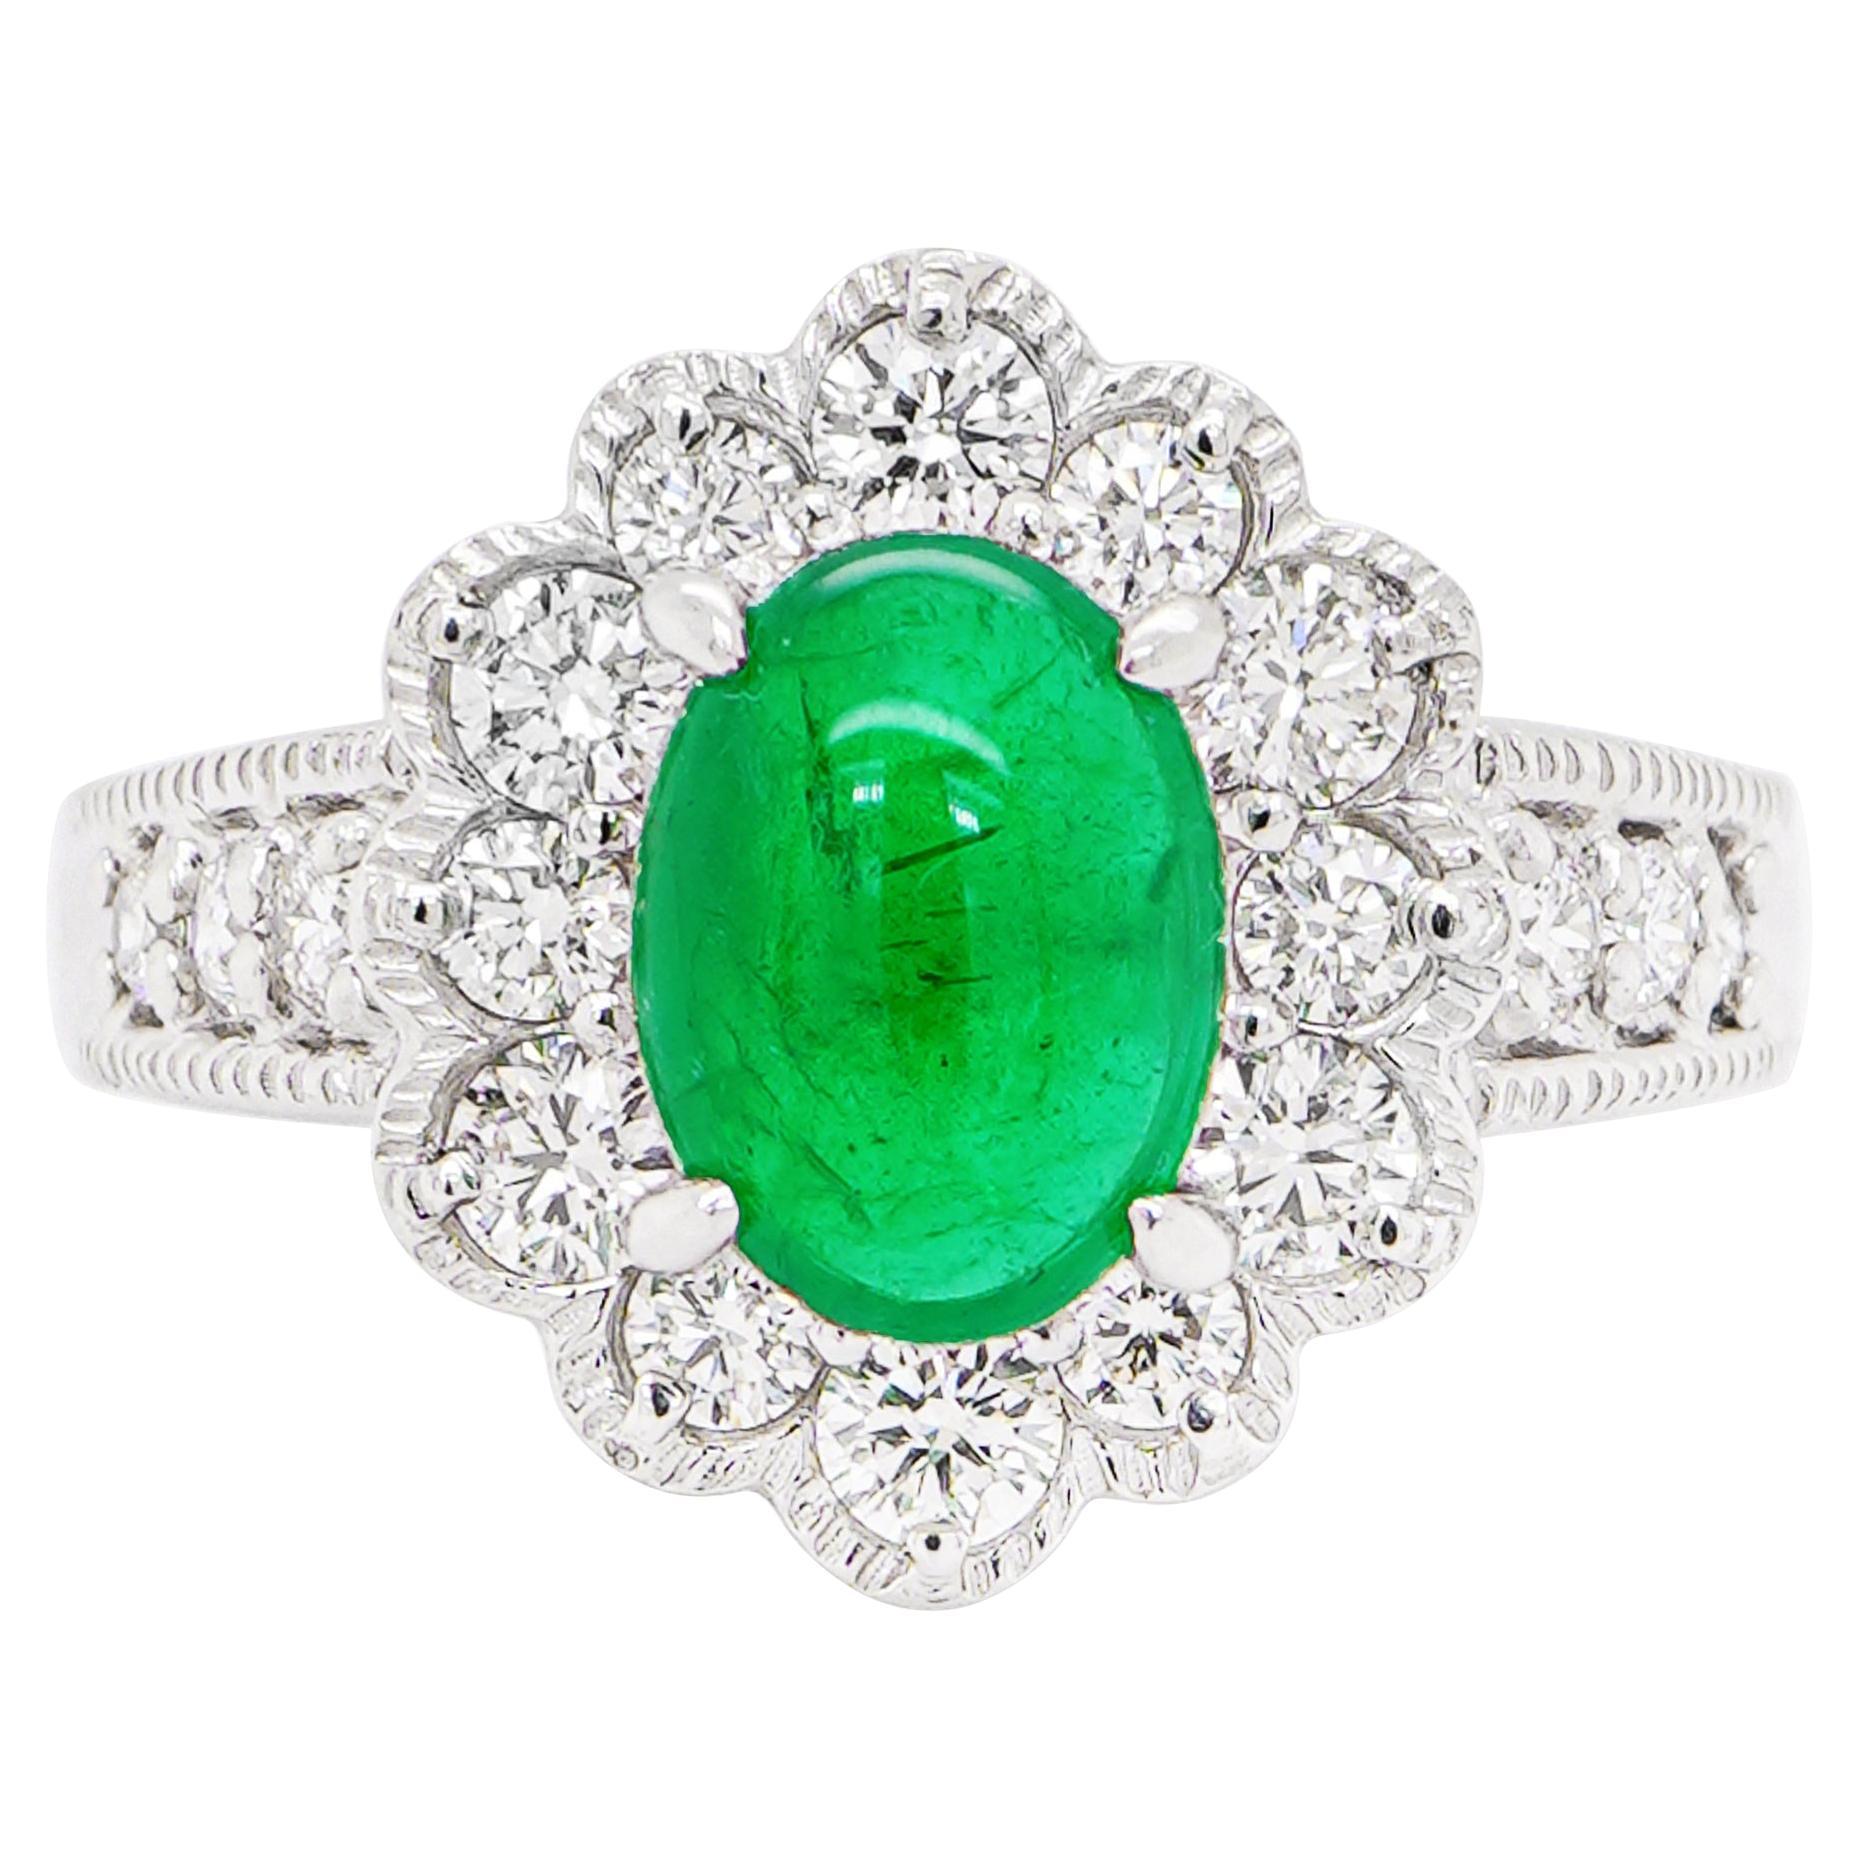 1.82 Carat Colombian Emerald & 0.83 Carat White Diamond PT 900 Simple Ring For Sale